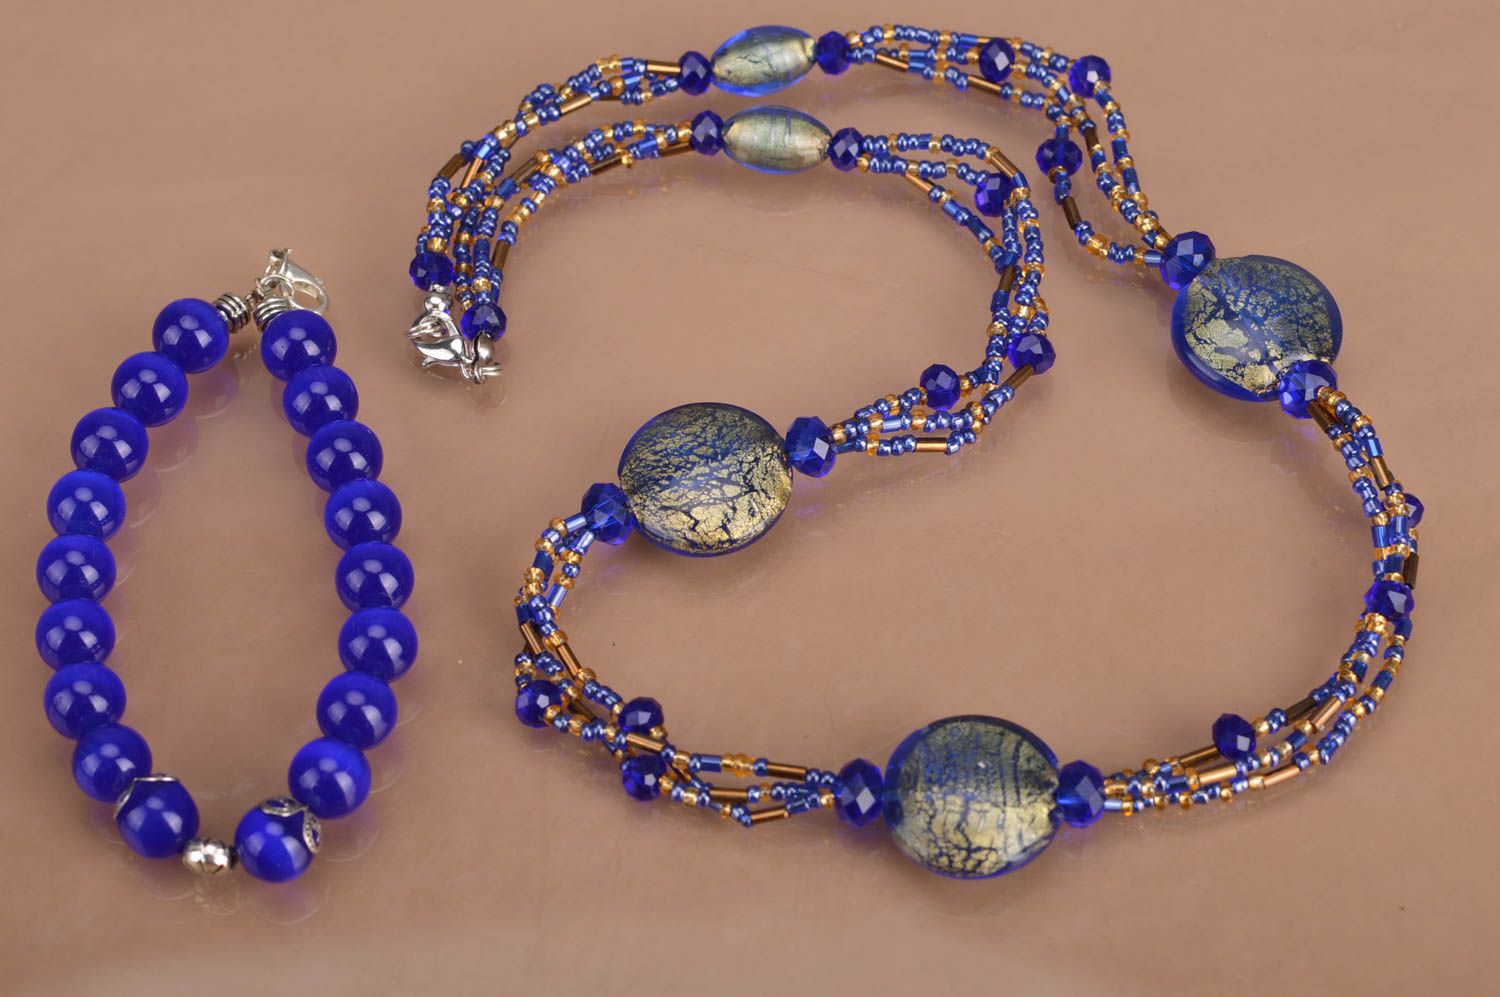 Handmade blue and golden beaded jewelry set wrist bracelet and long necklace photo 5